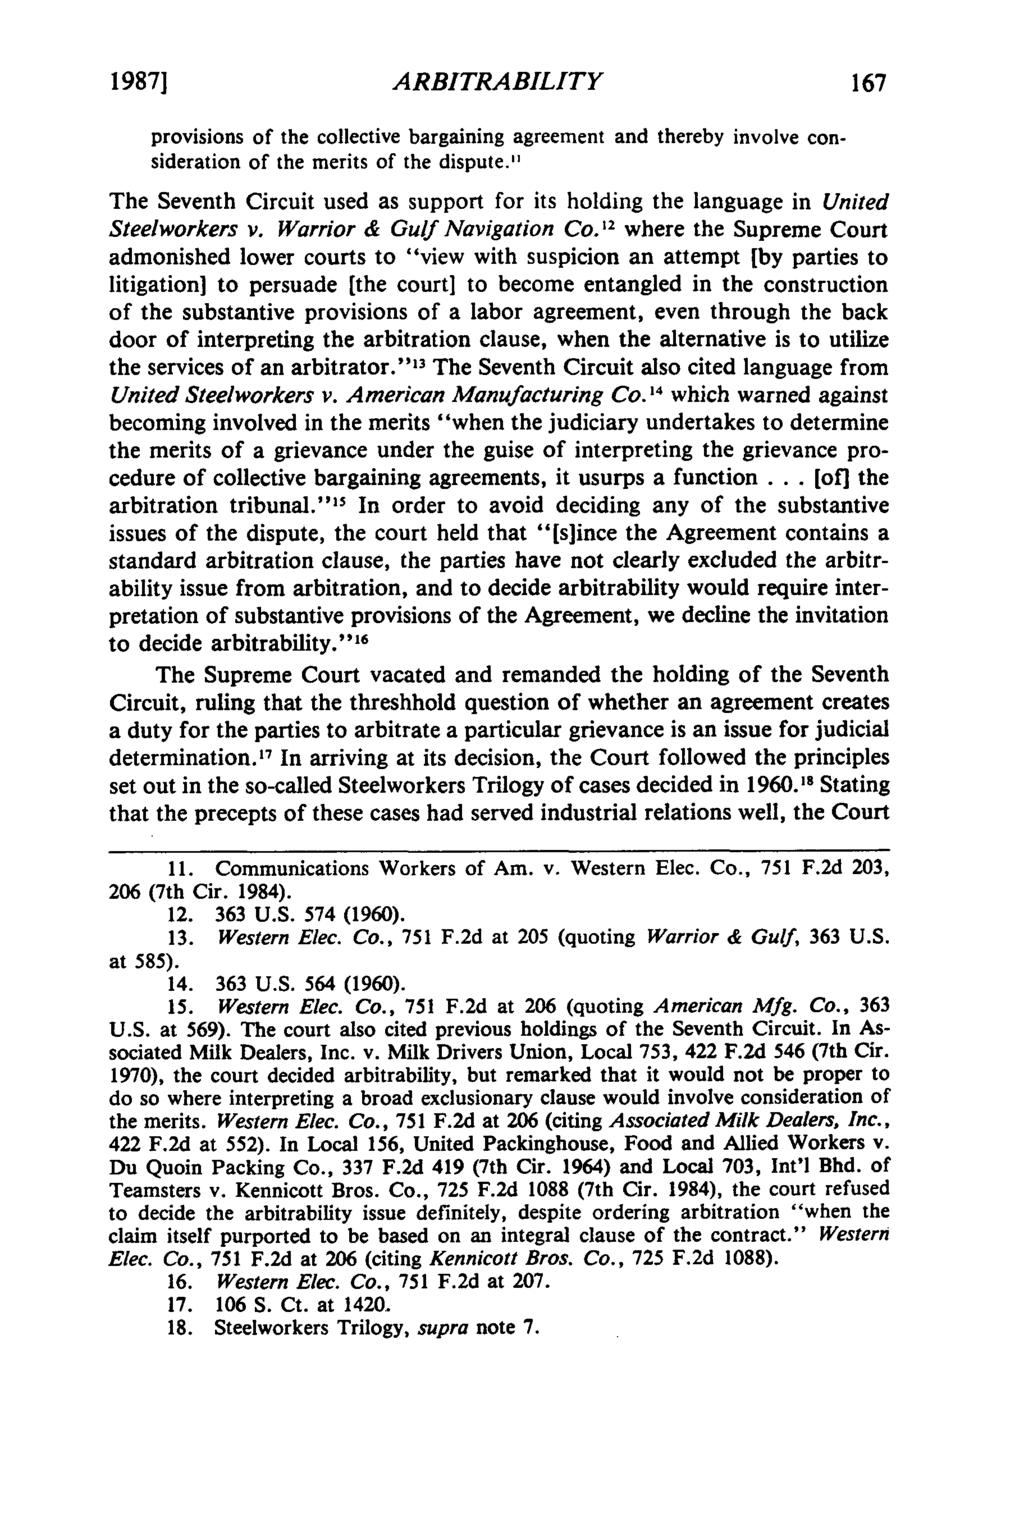 19871 Morgan: Morgan: Deciding Arbitrability: AT&(and)T Technologies ARBITRABILITY provisions of the collective bargaining agreement and thereby involve consideration of the merits of the dispute.